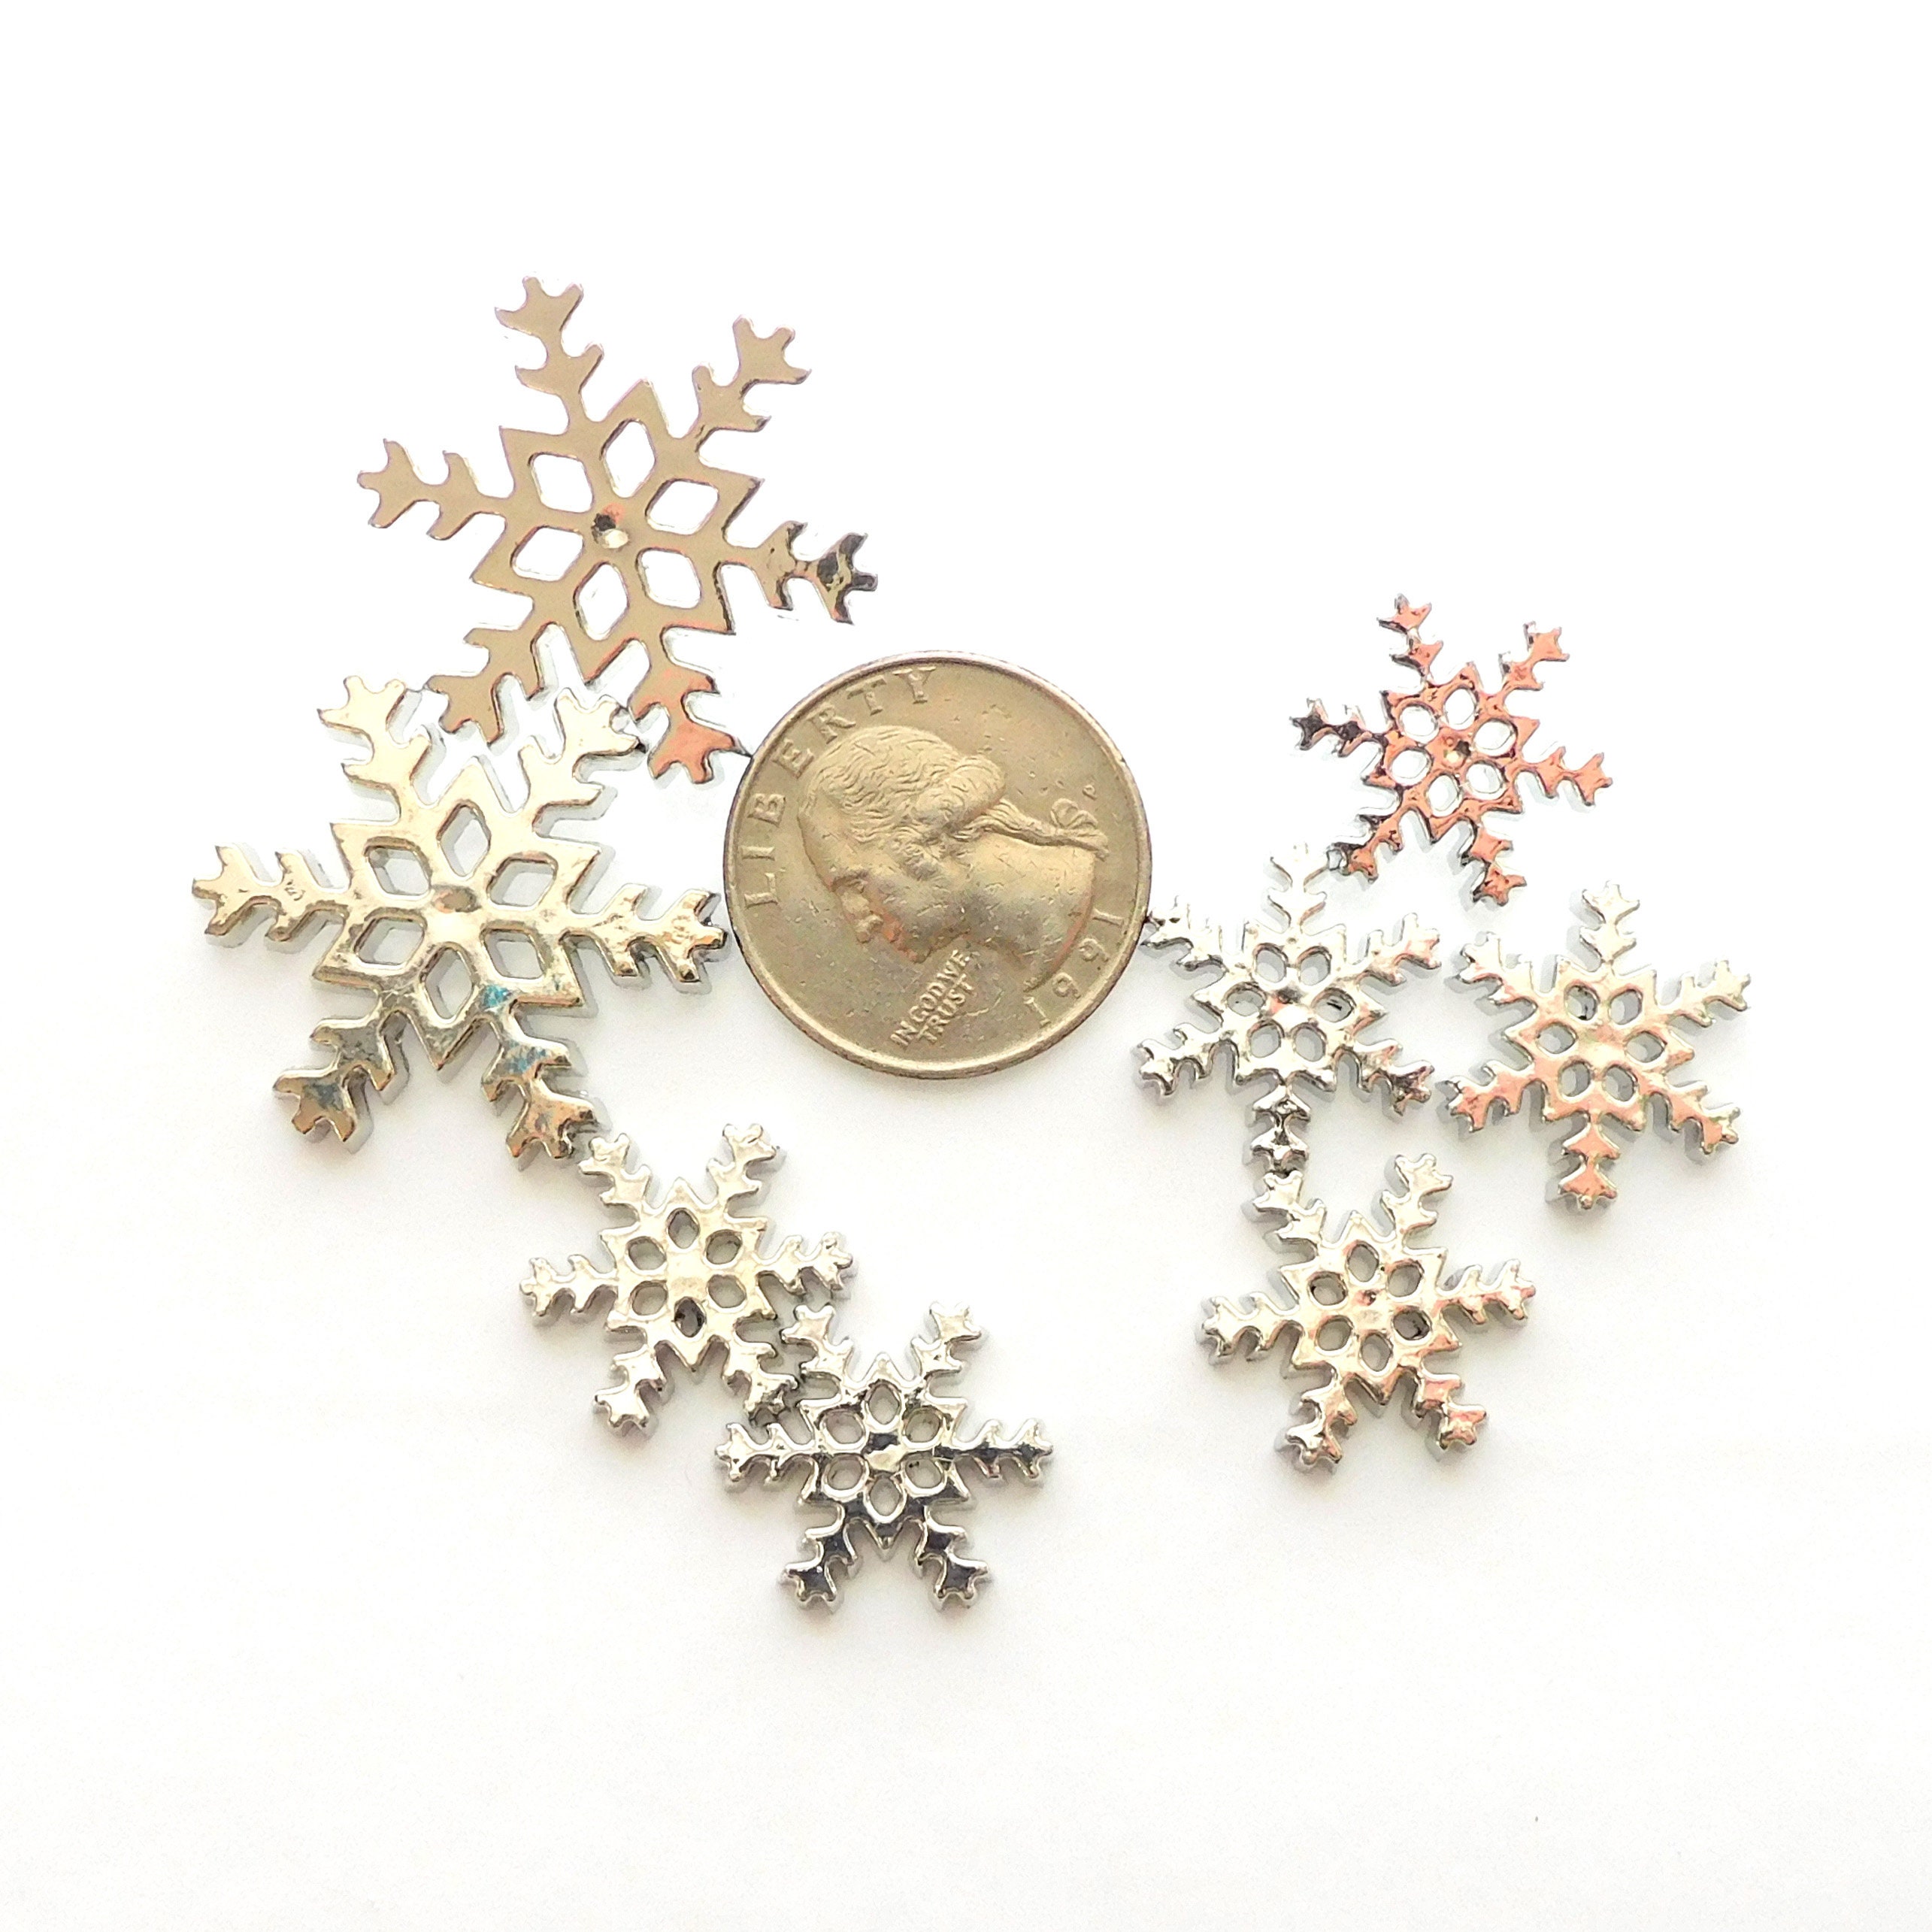 Snowflake Metal Buttons 5/8 Antique Silver Qty 4 to 8 Snow Winter